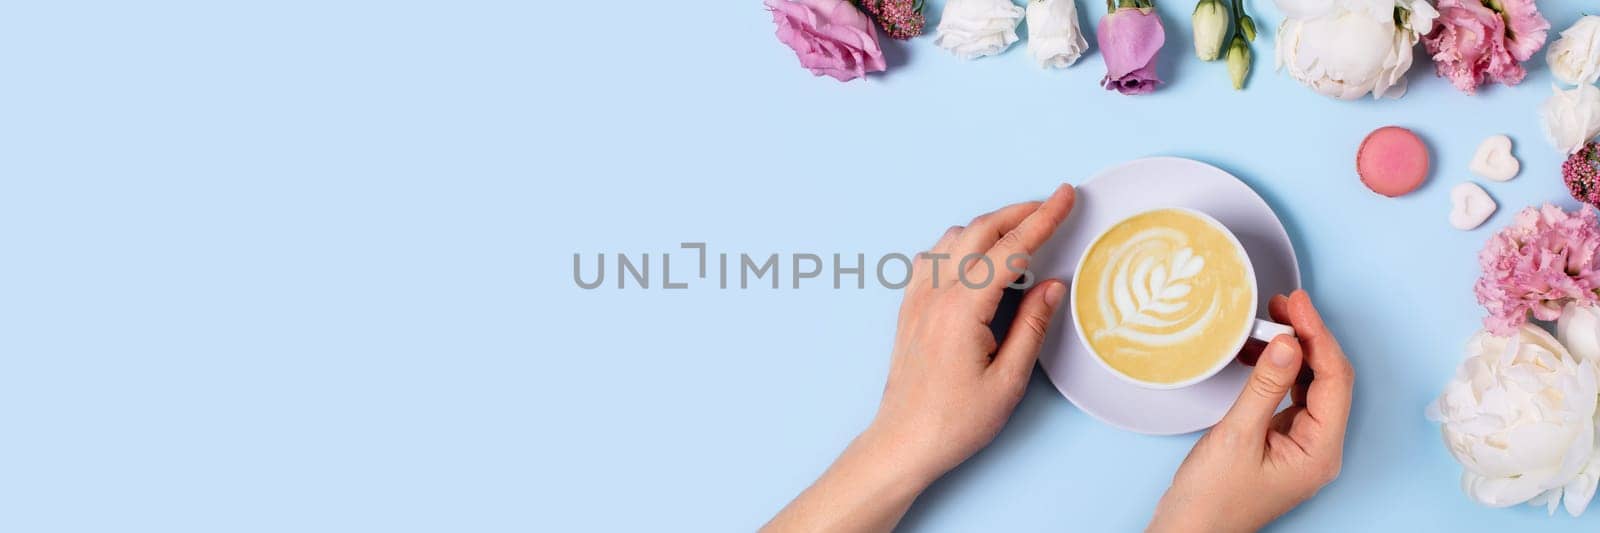 Festive web banner with a blue background. Women's hands hugging a cup of delicious latte macchiato surrounded by roses, peonies, macarons, and pieces of sugar in the form of hearts.